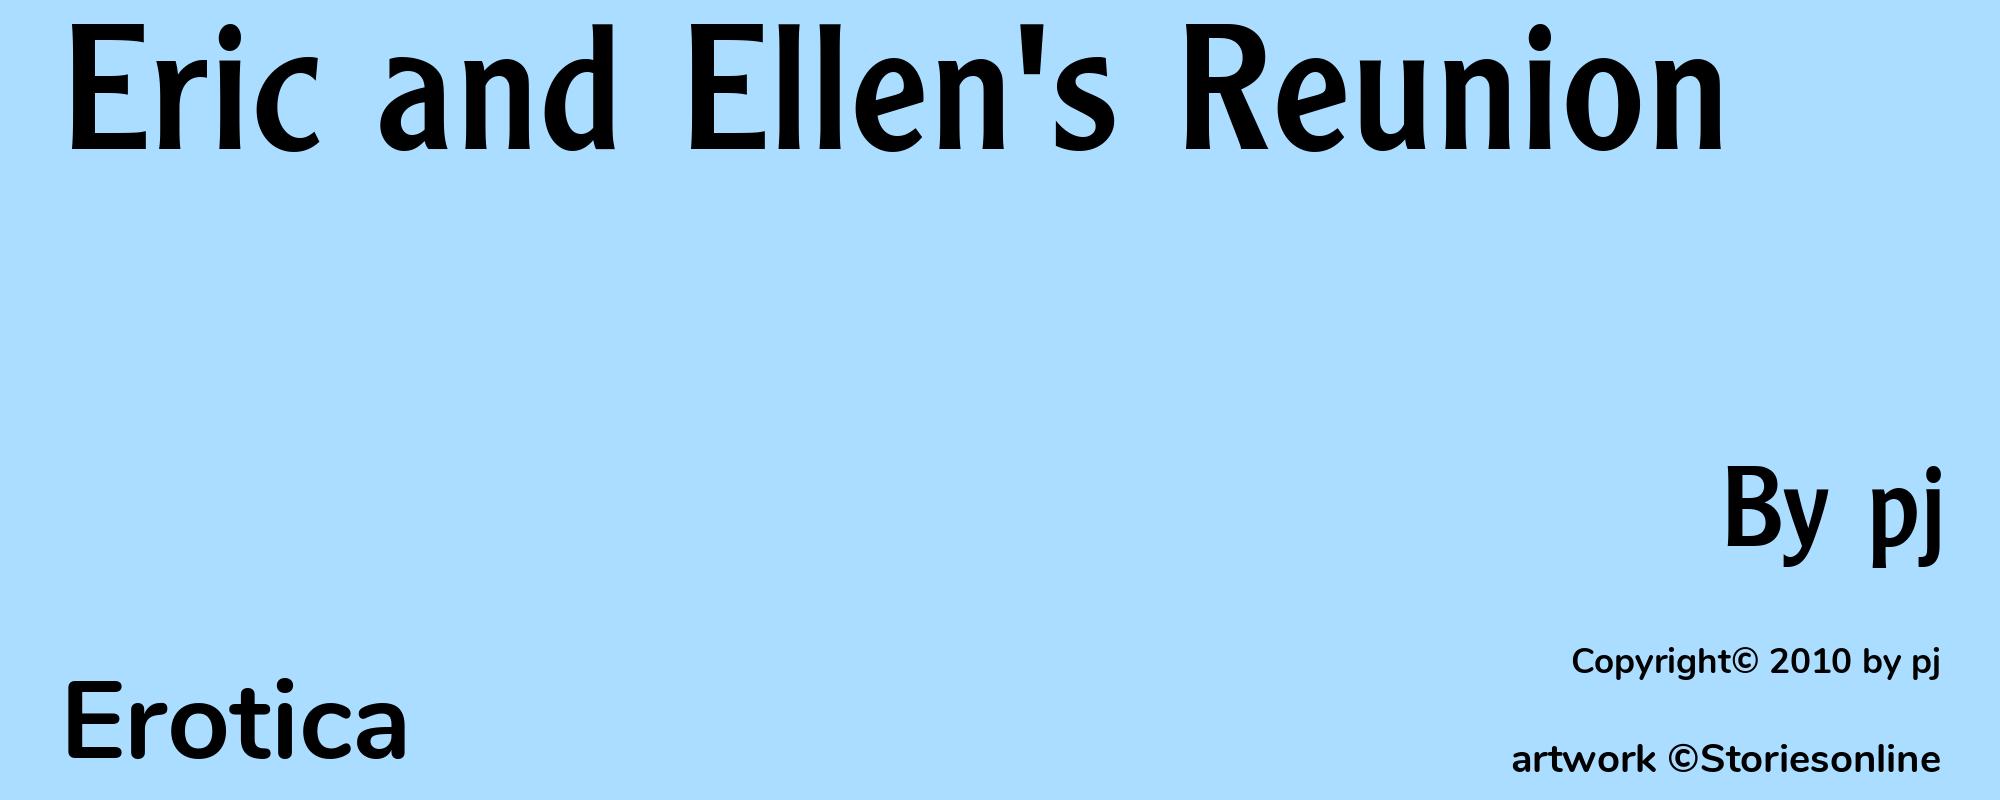 Eric and Ellen's Reunion - Cover